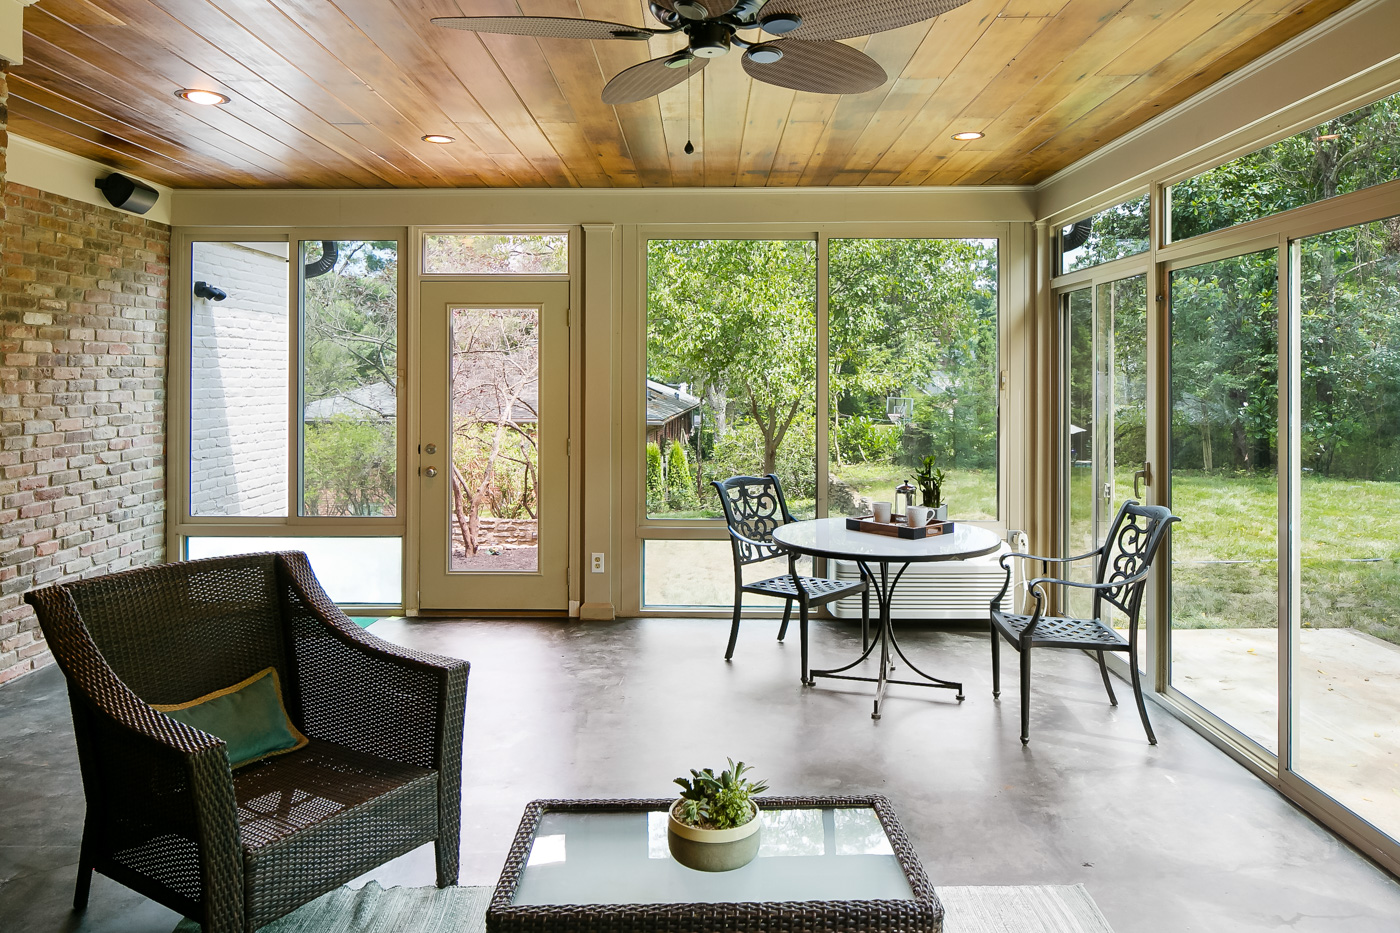 Glassed-in, fully climate-controlled sunroom